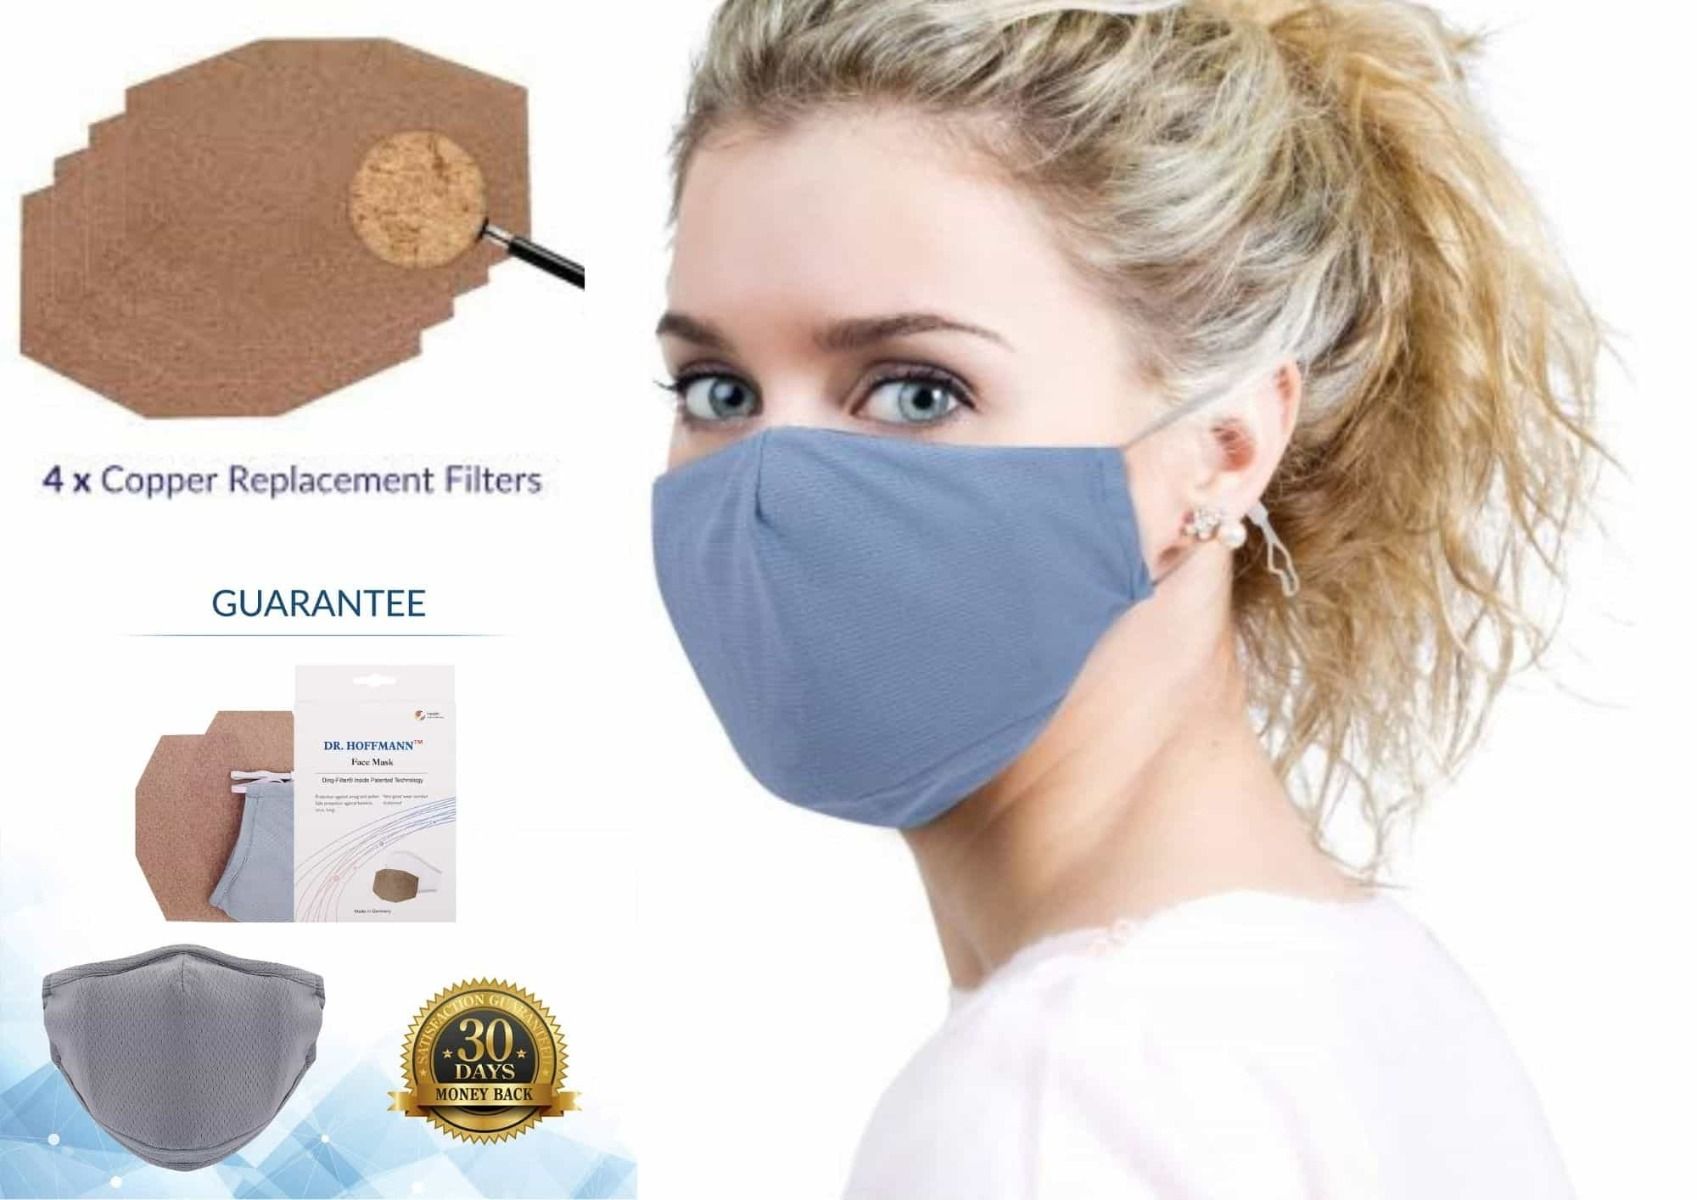 Copper filter facemask to prevent Covid-19